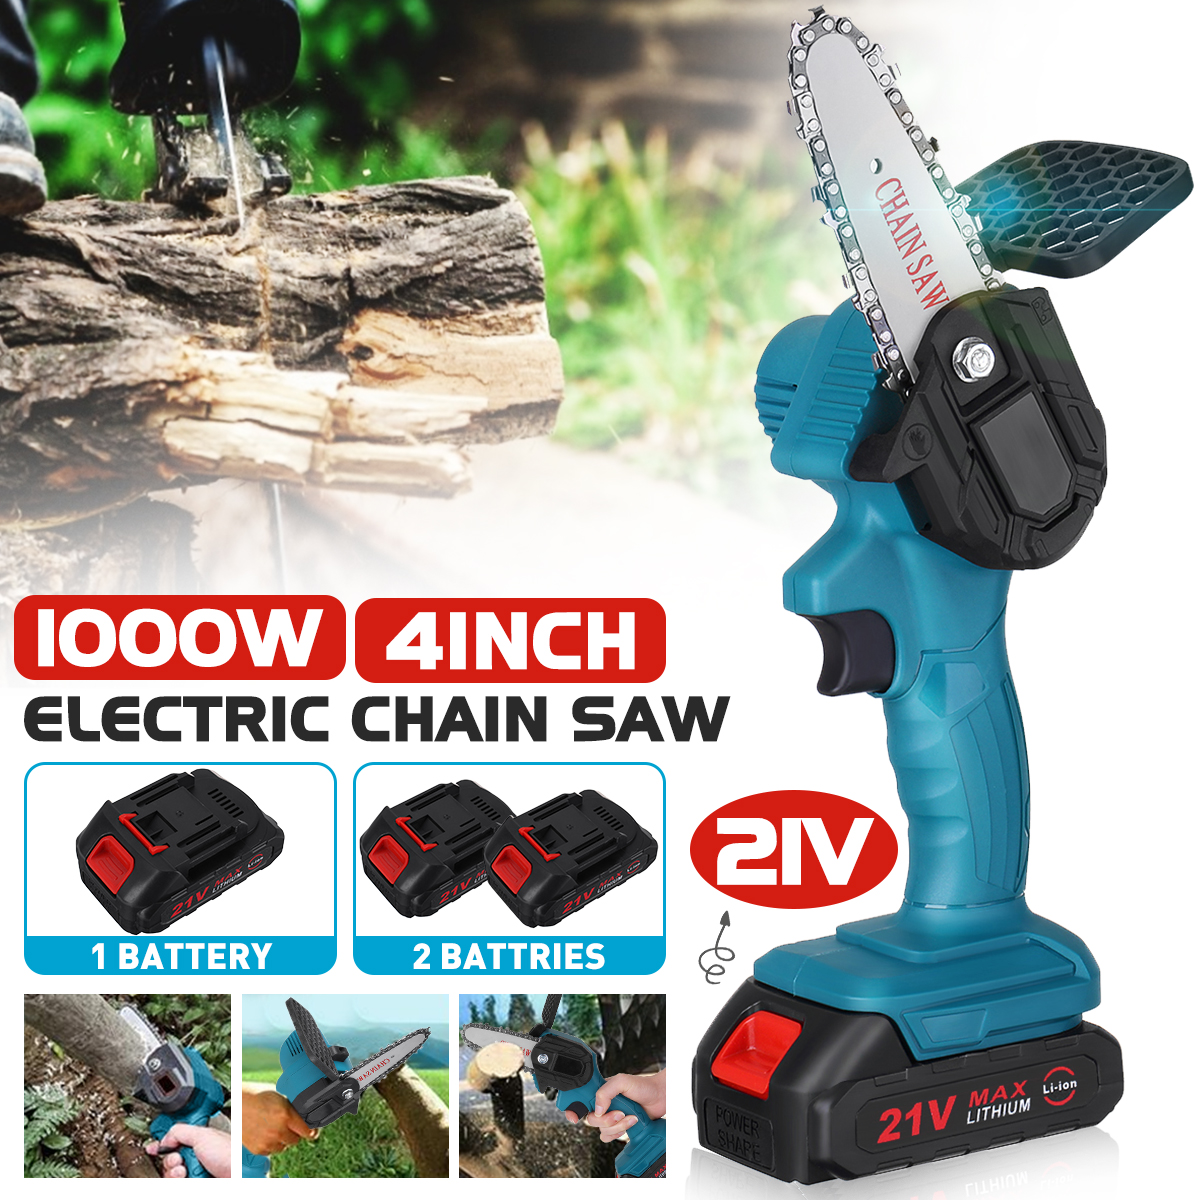 4-Inch-21V-Cordless-Electric-Chain-Saw-W-01pc2pcs-Batteries-For-Tree-Branch-Wood-Cutting-Tool-1805148-1